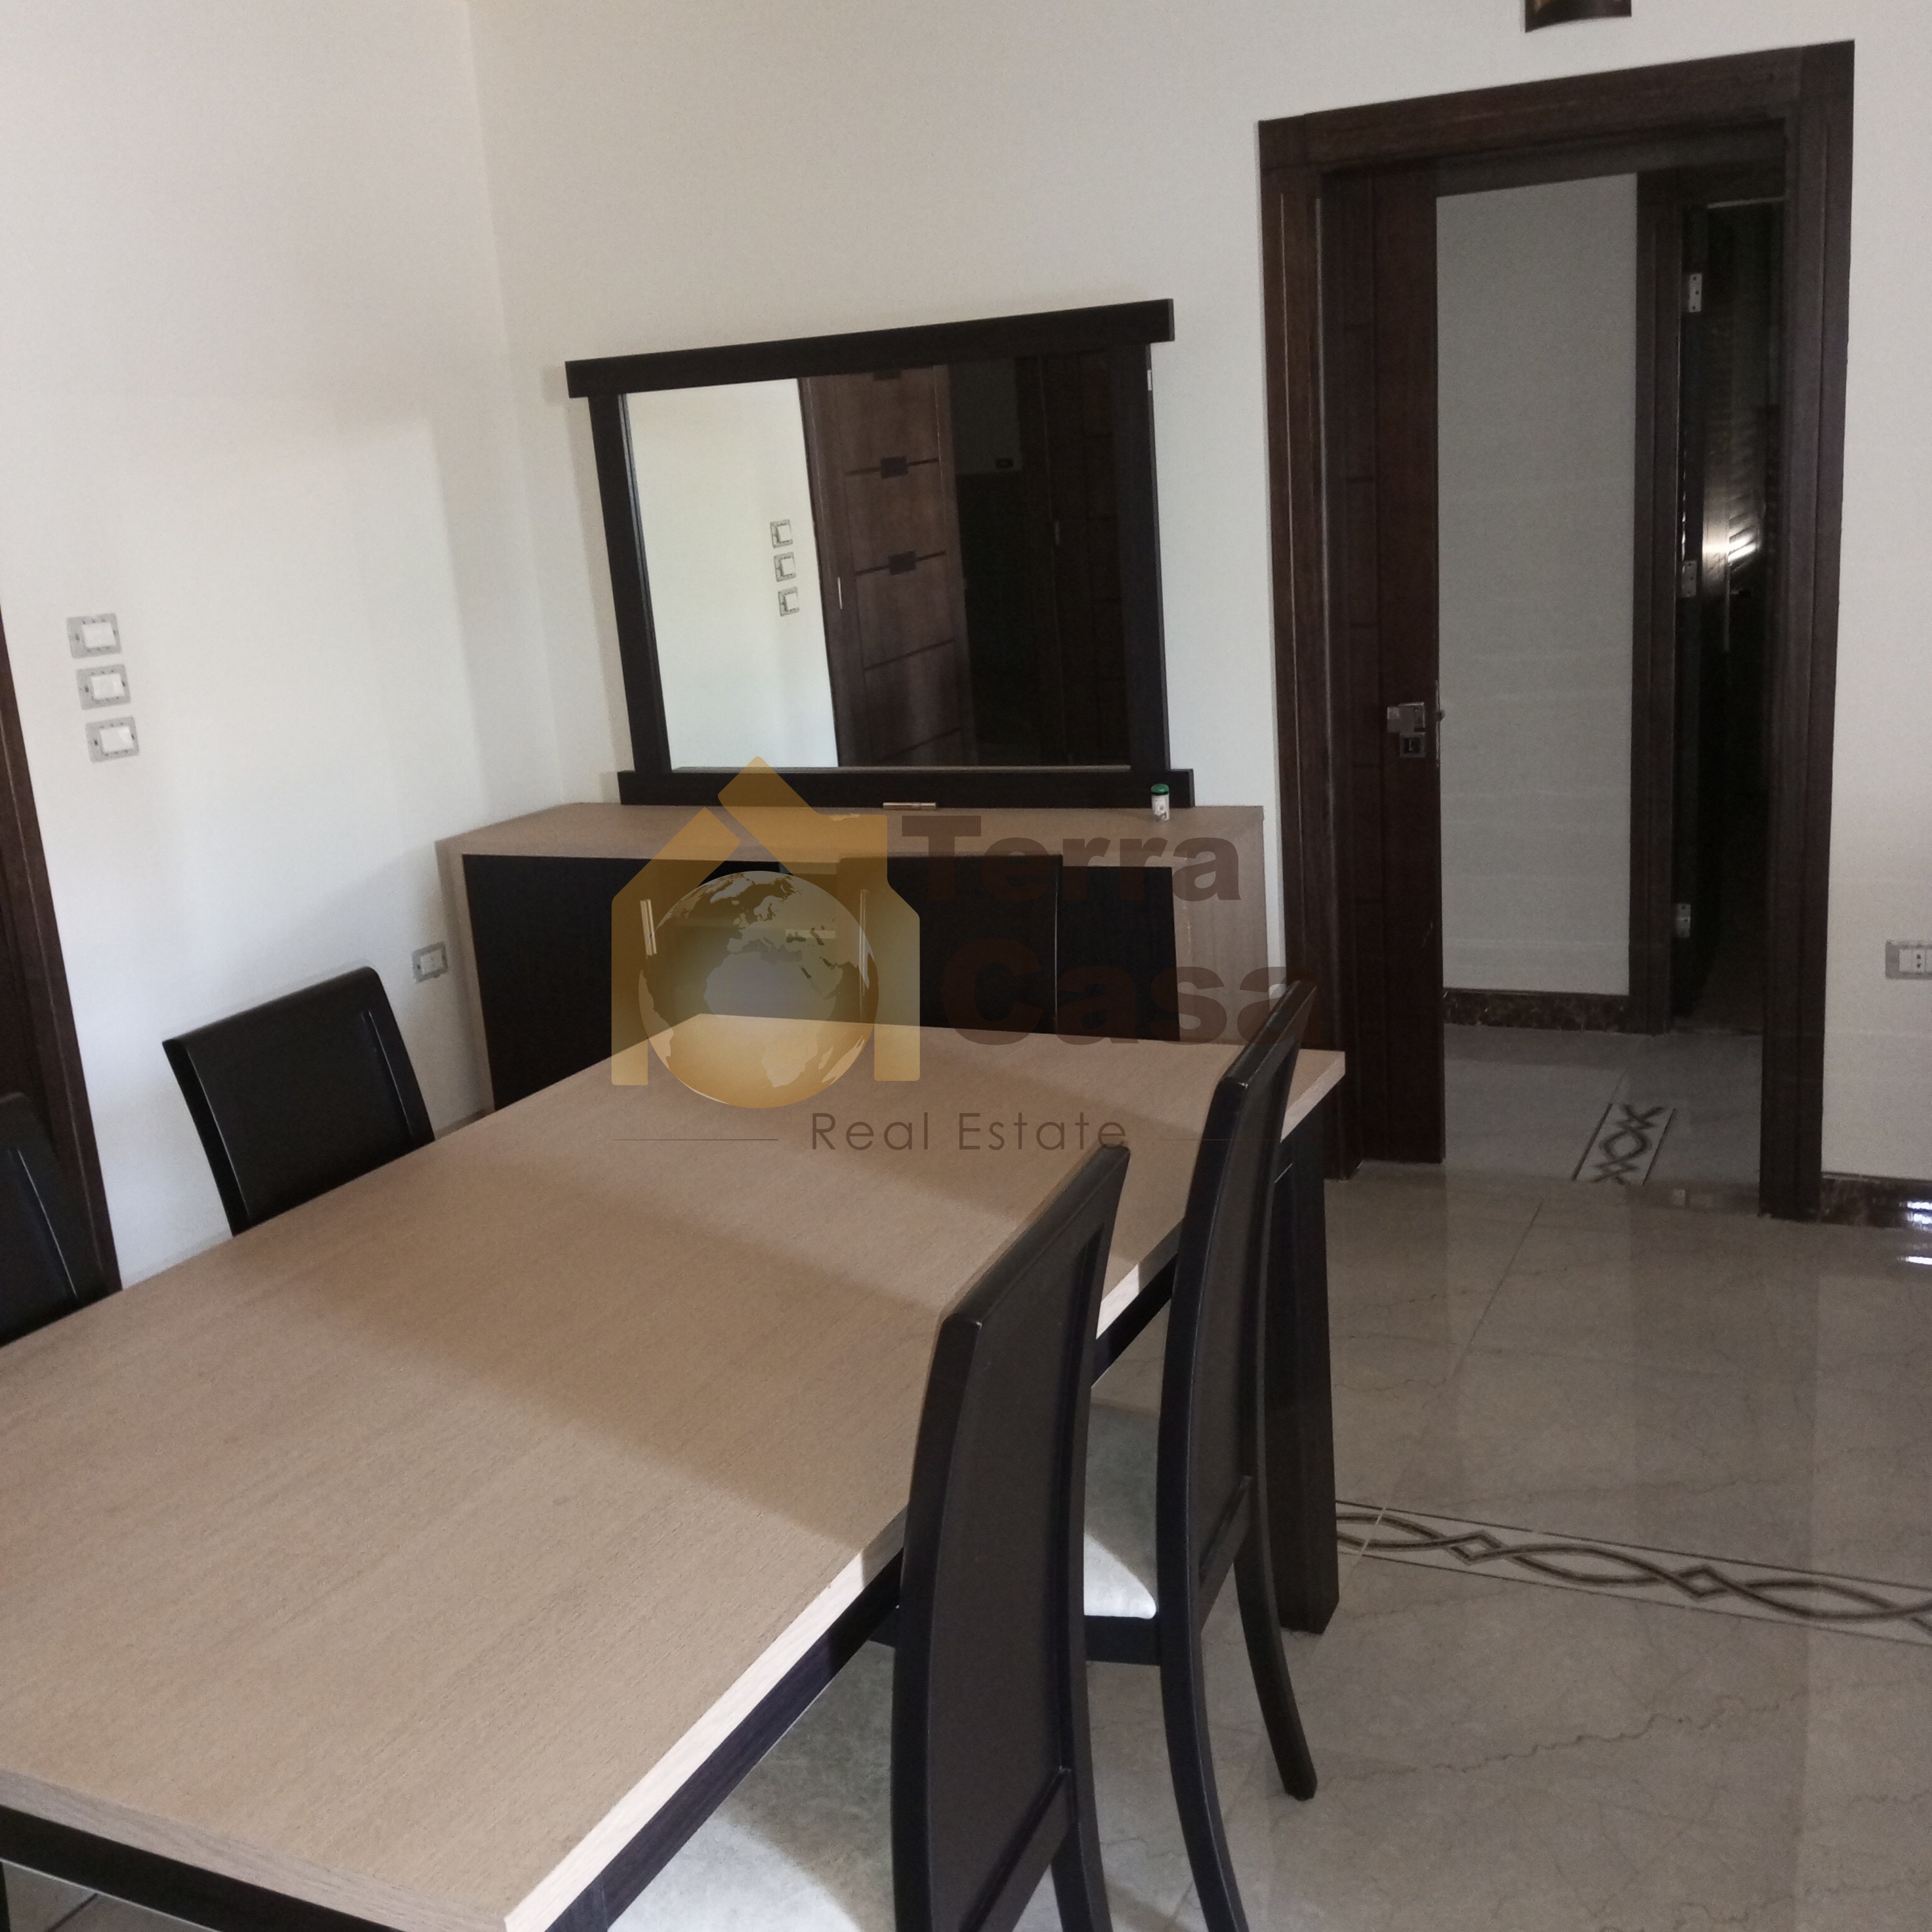 Ksara deluxe fully furnished 2 bedrooms apartment for sale.